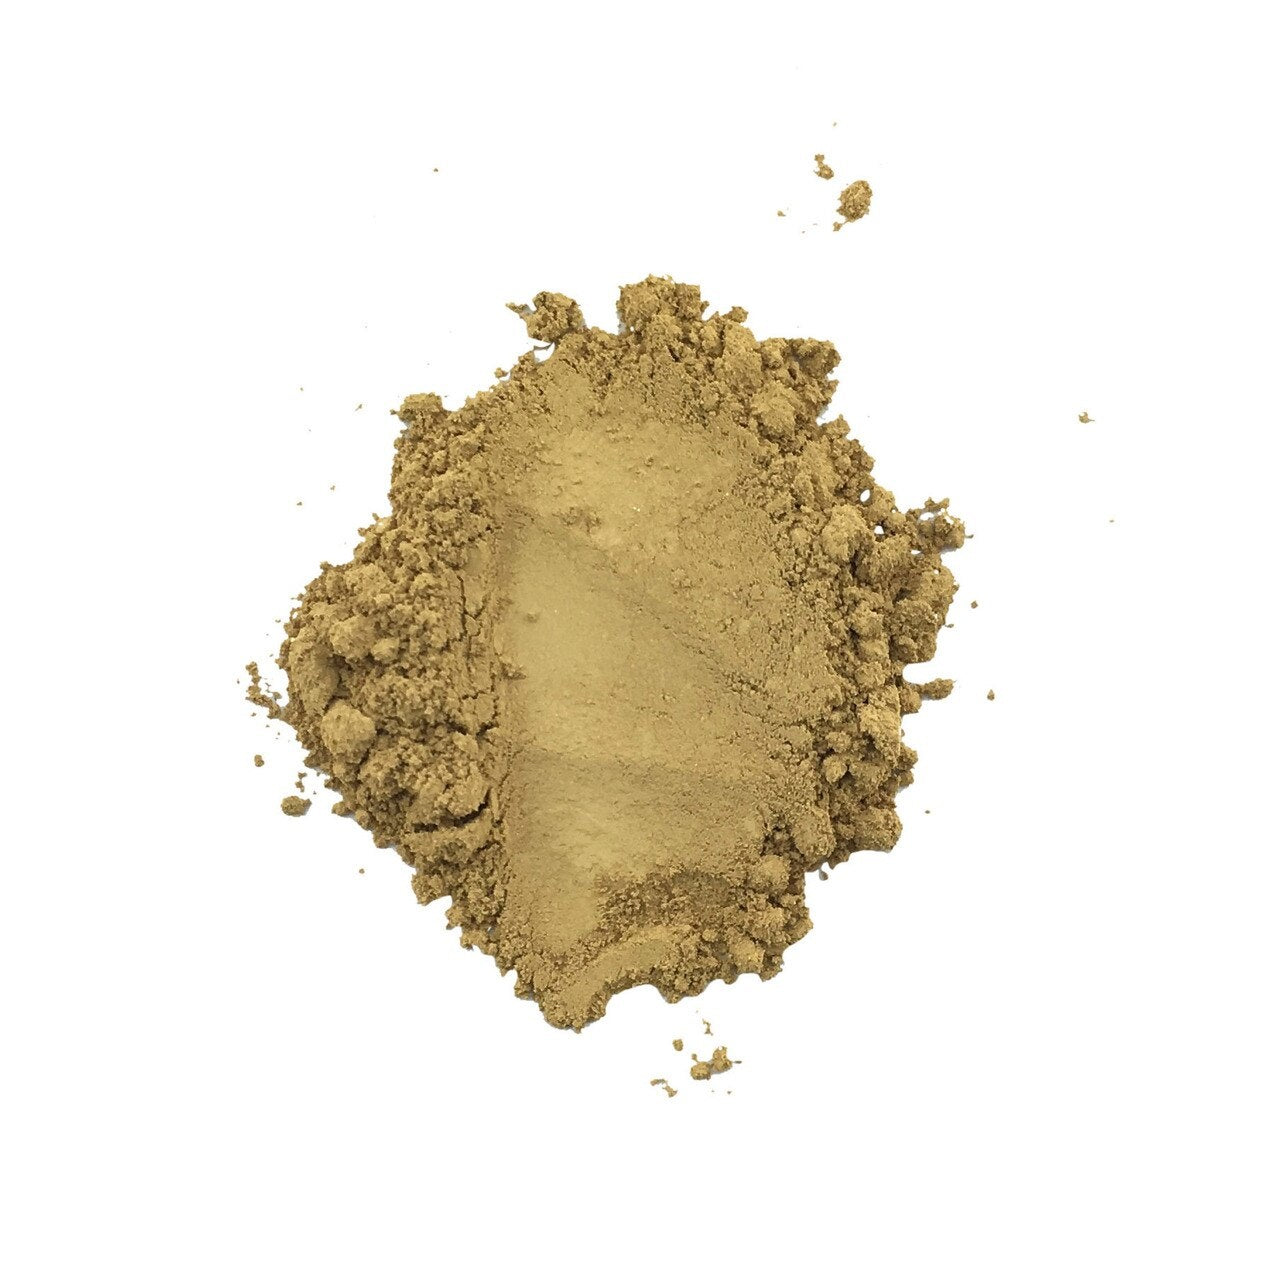 Pure Anada Amber Honey Loose Mineral Foundation 10g